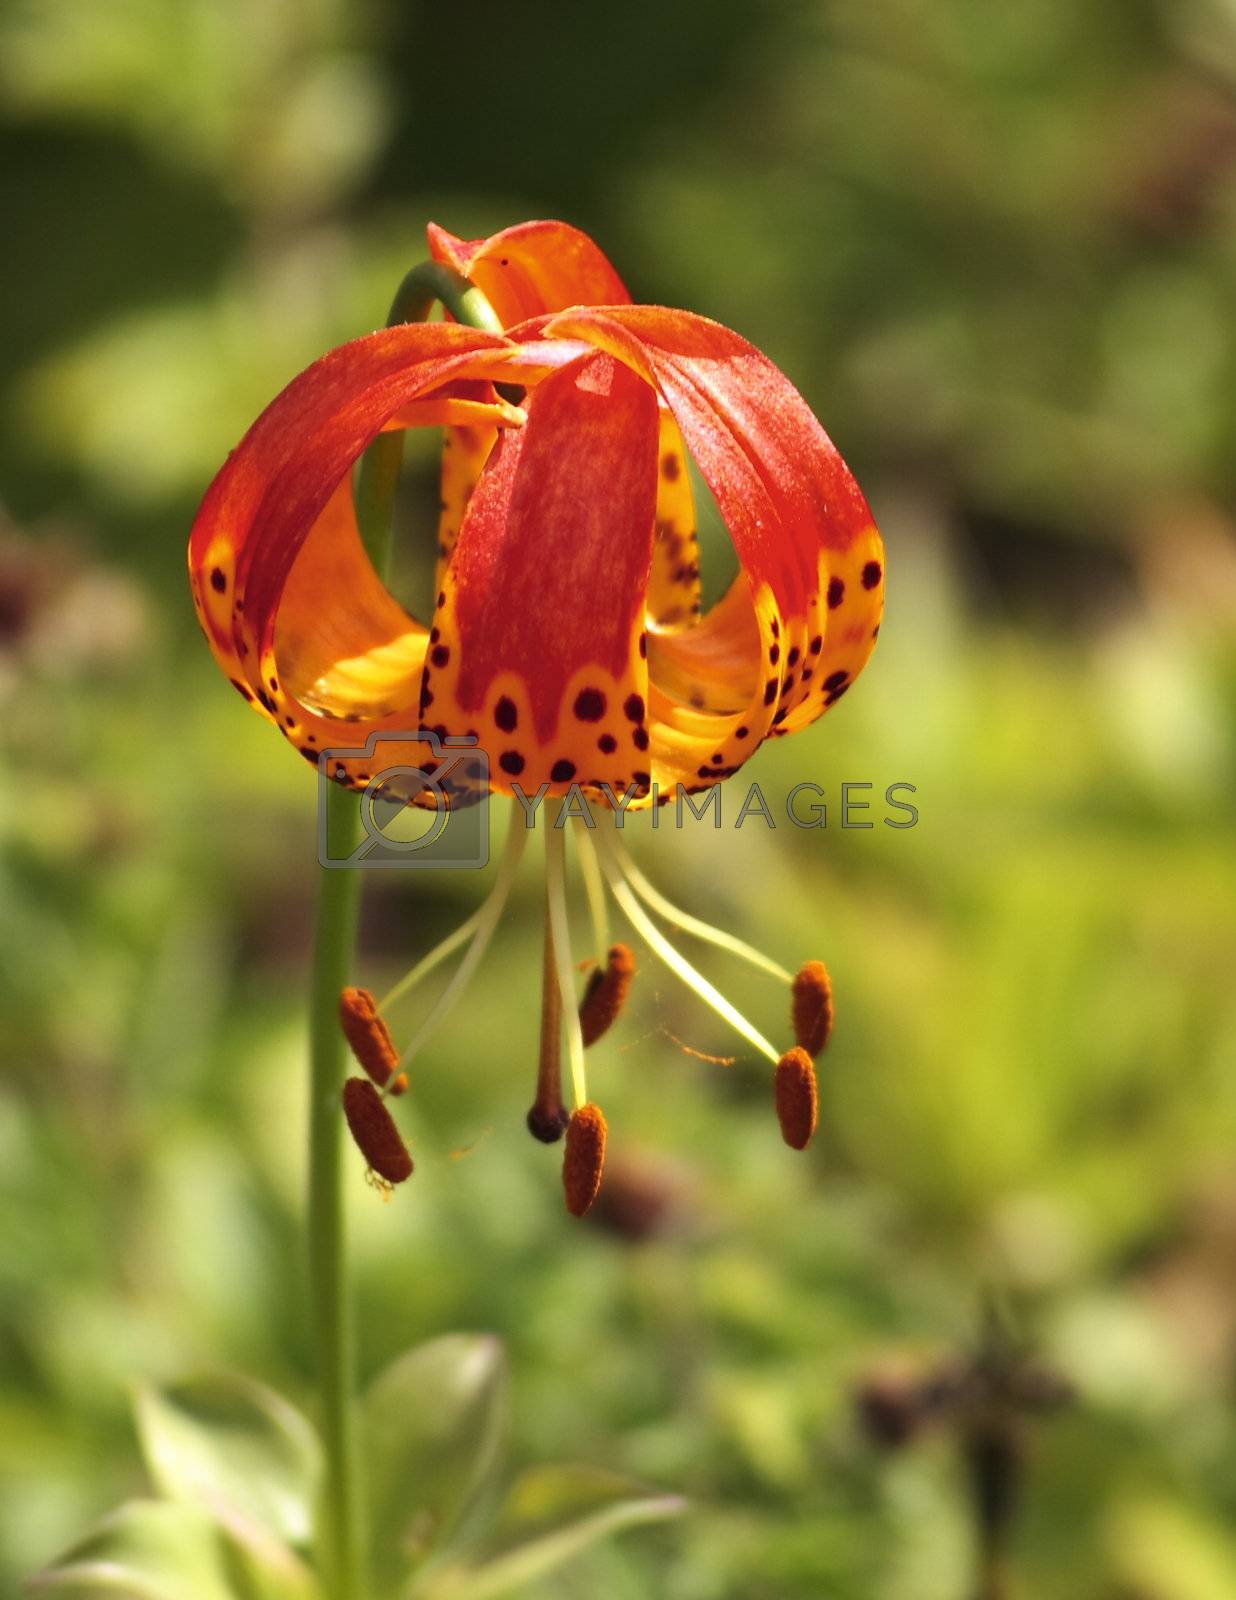 Royalty free image of lilium pardalinum by leafy